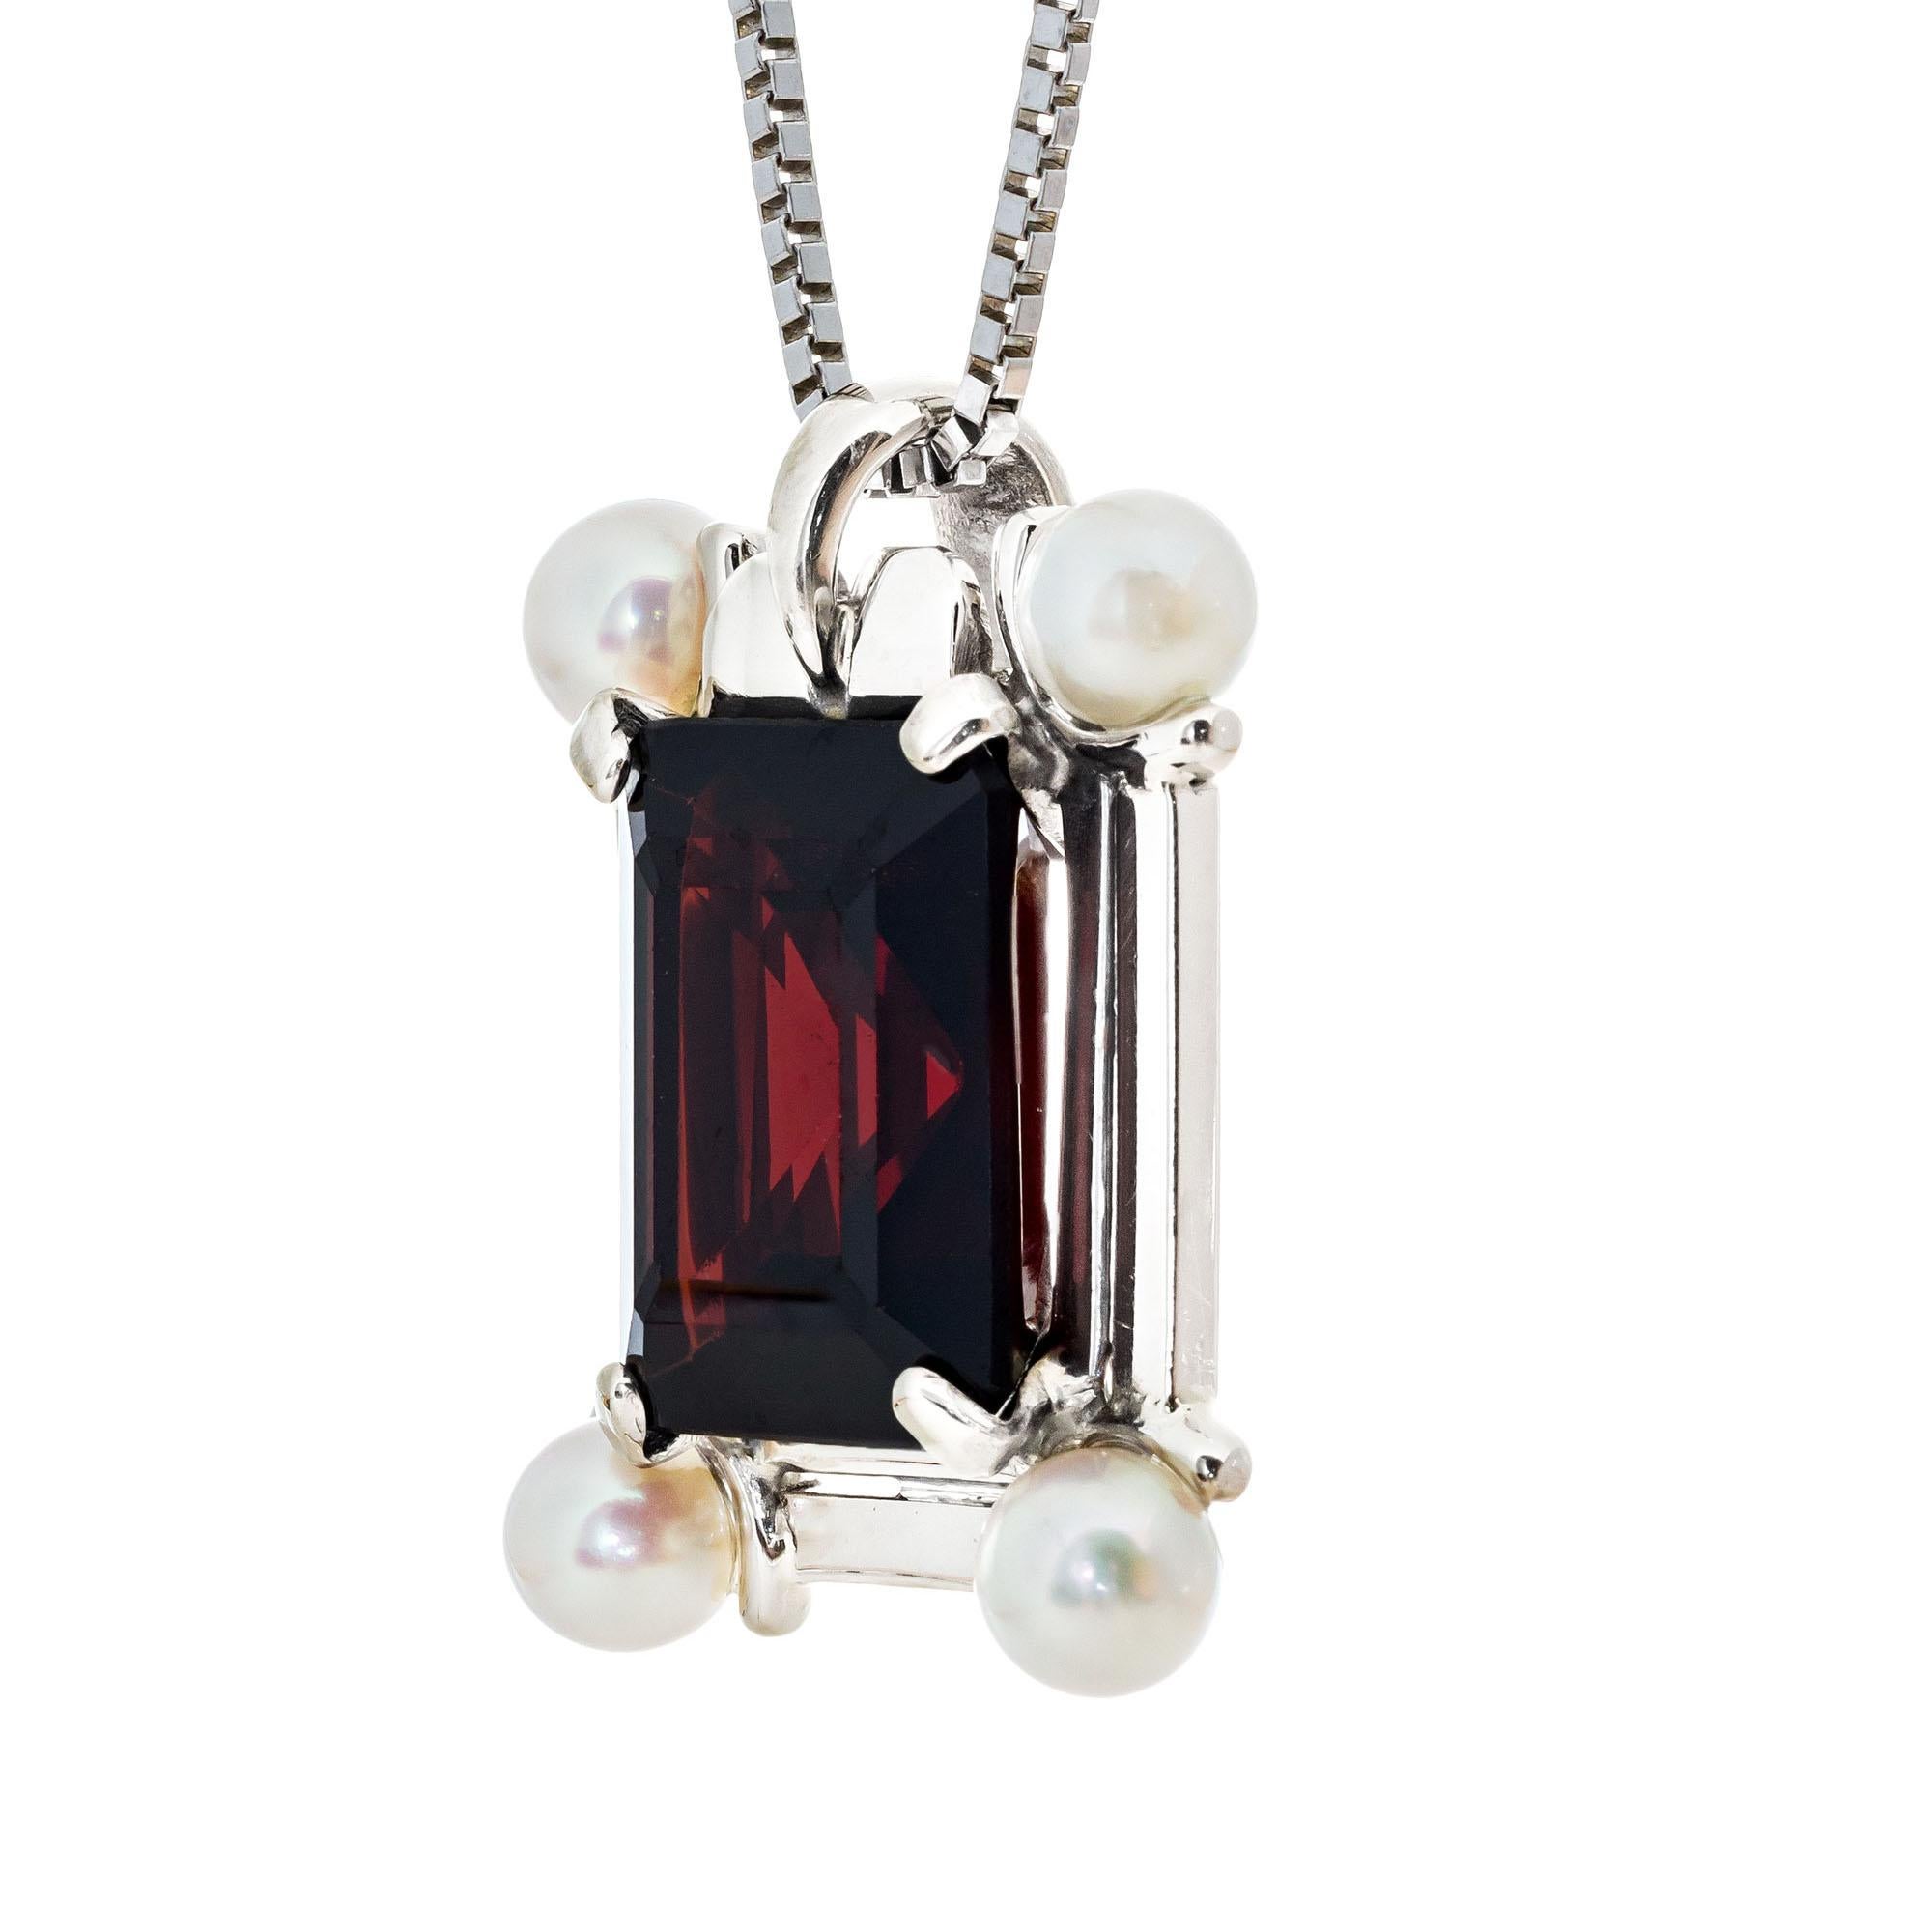 1950's Mid Century pendant necklace with a 4.50 carat Emerald cut center garnet with four cultured accent pearls in 14k white gold. 18.75 inches in length. 

1 rectangular brownish red garnet, approx. 4.50cts
4 cultured white pearls 
14k white gold